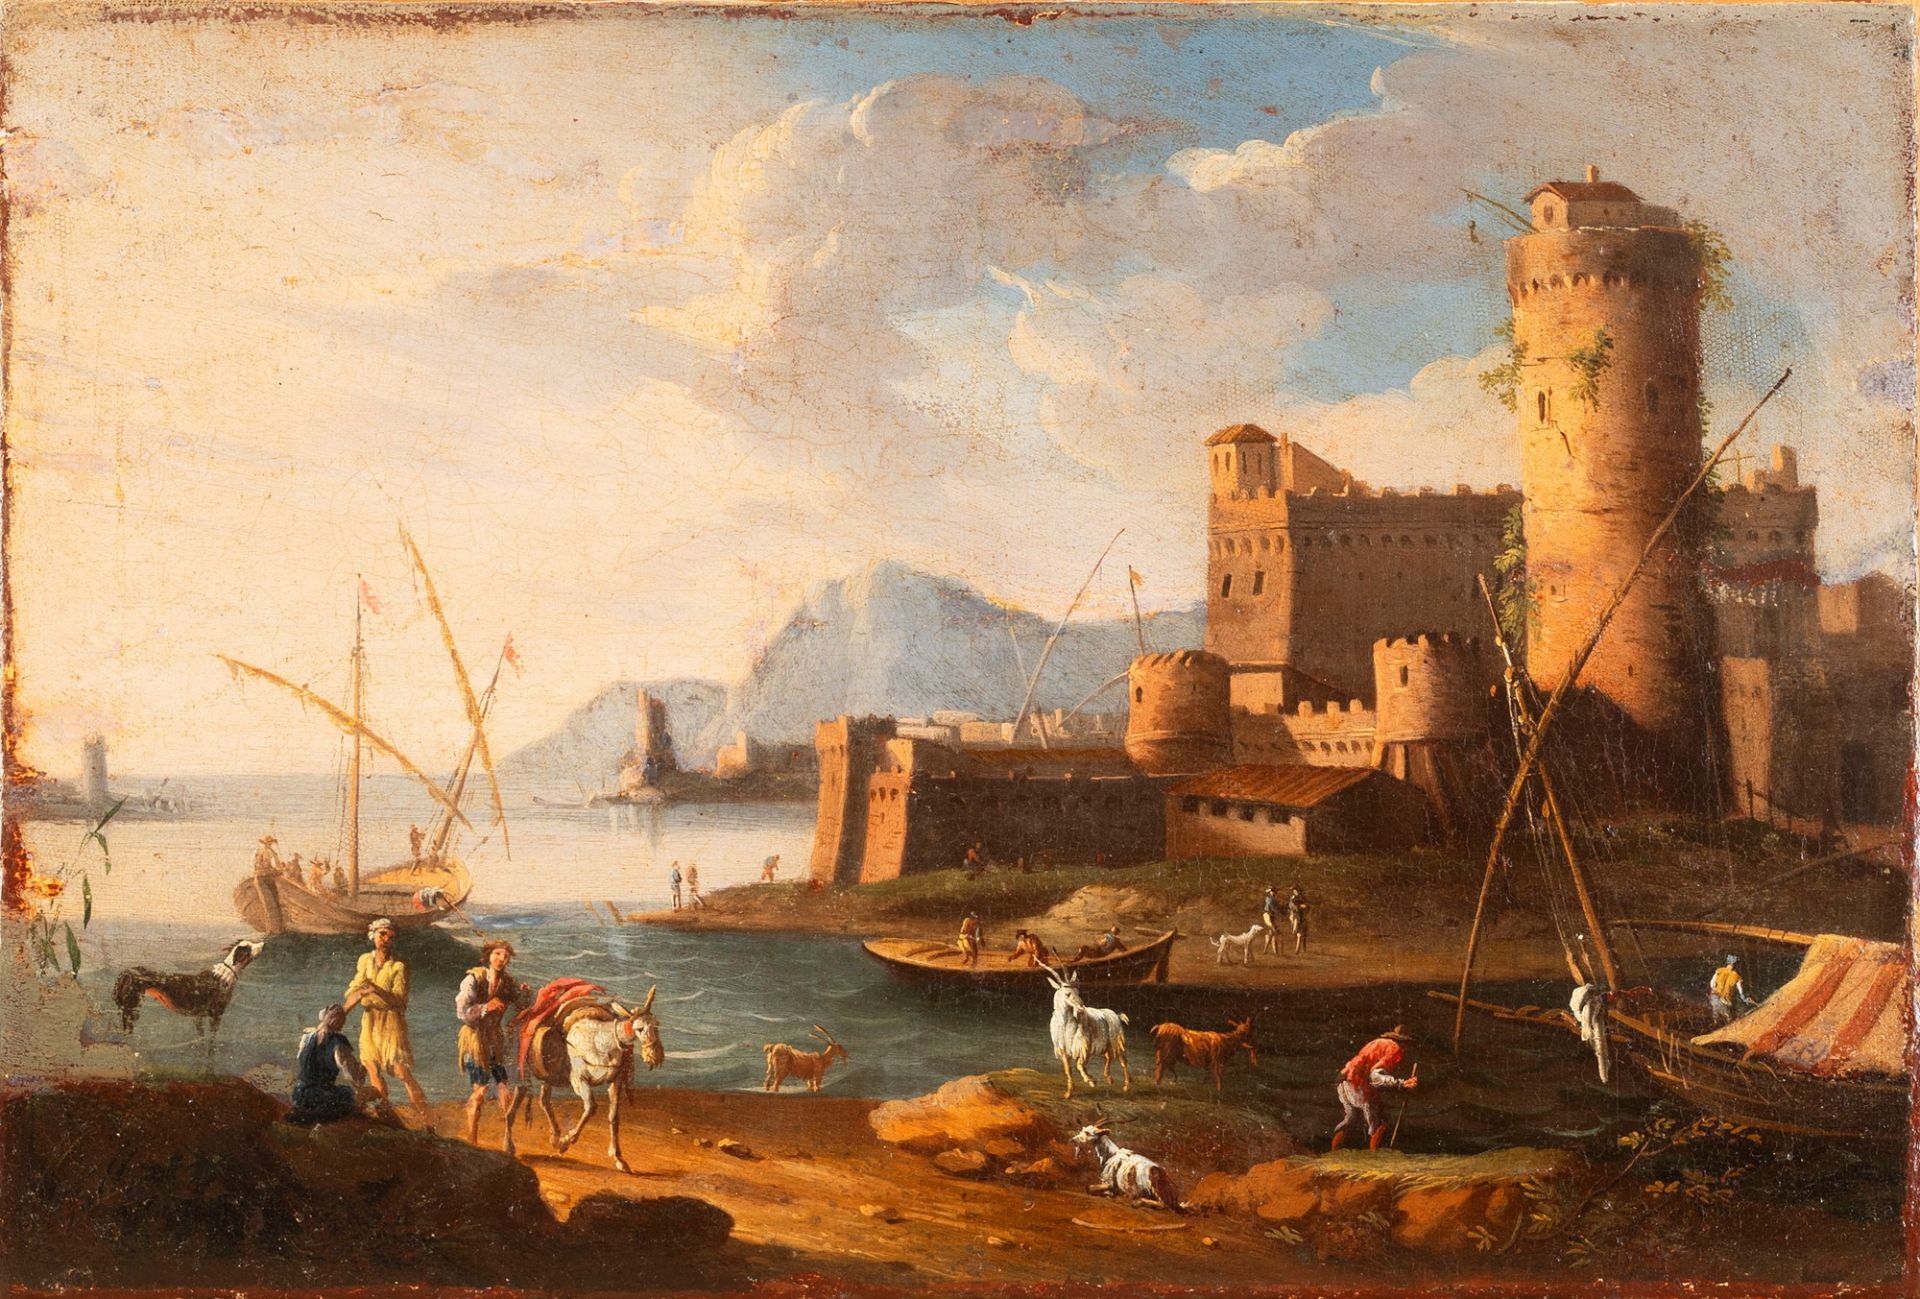 Flemish painter active in Italy, early eighteenth century - Coastal landscape with figures